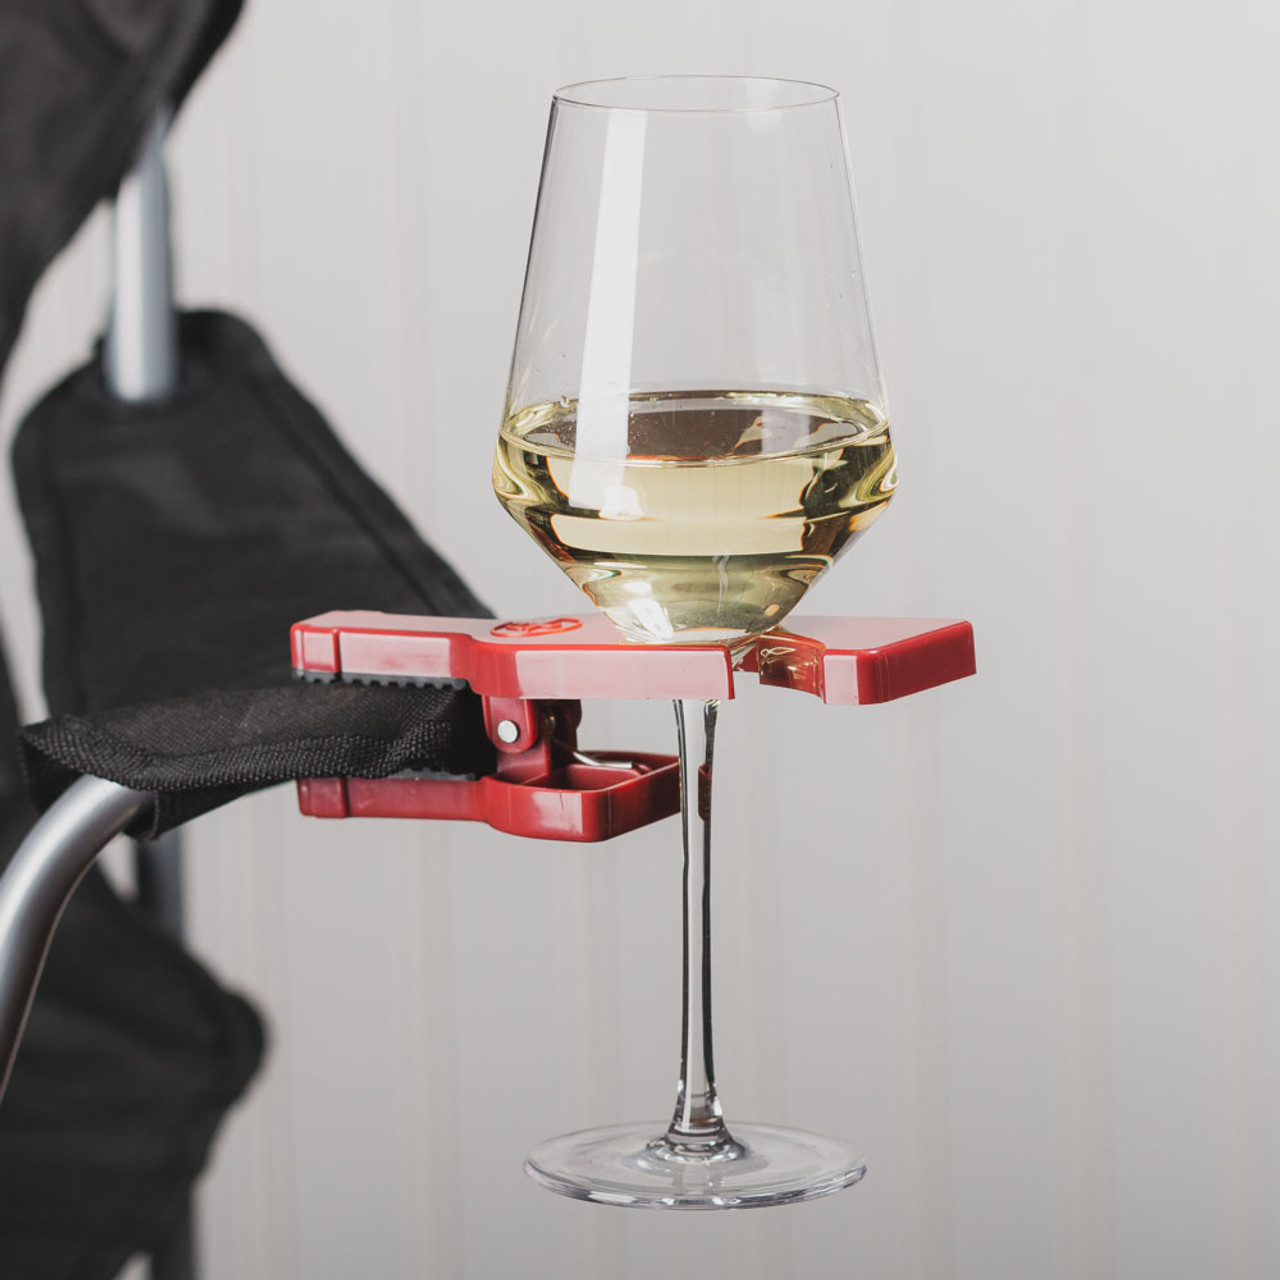 Wall-mounted Martini/wine glass holder - The Wave